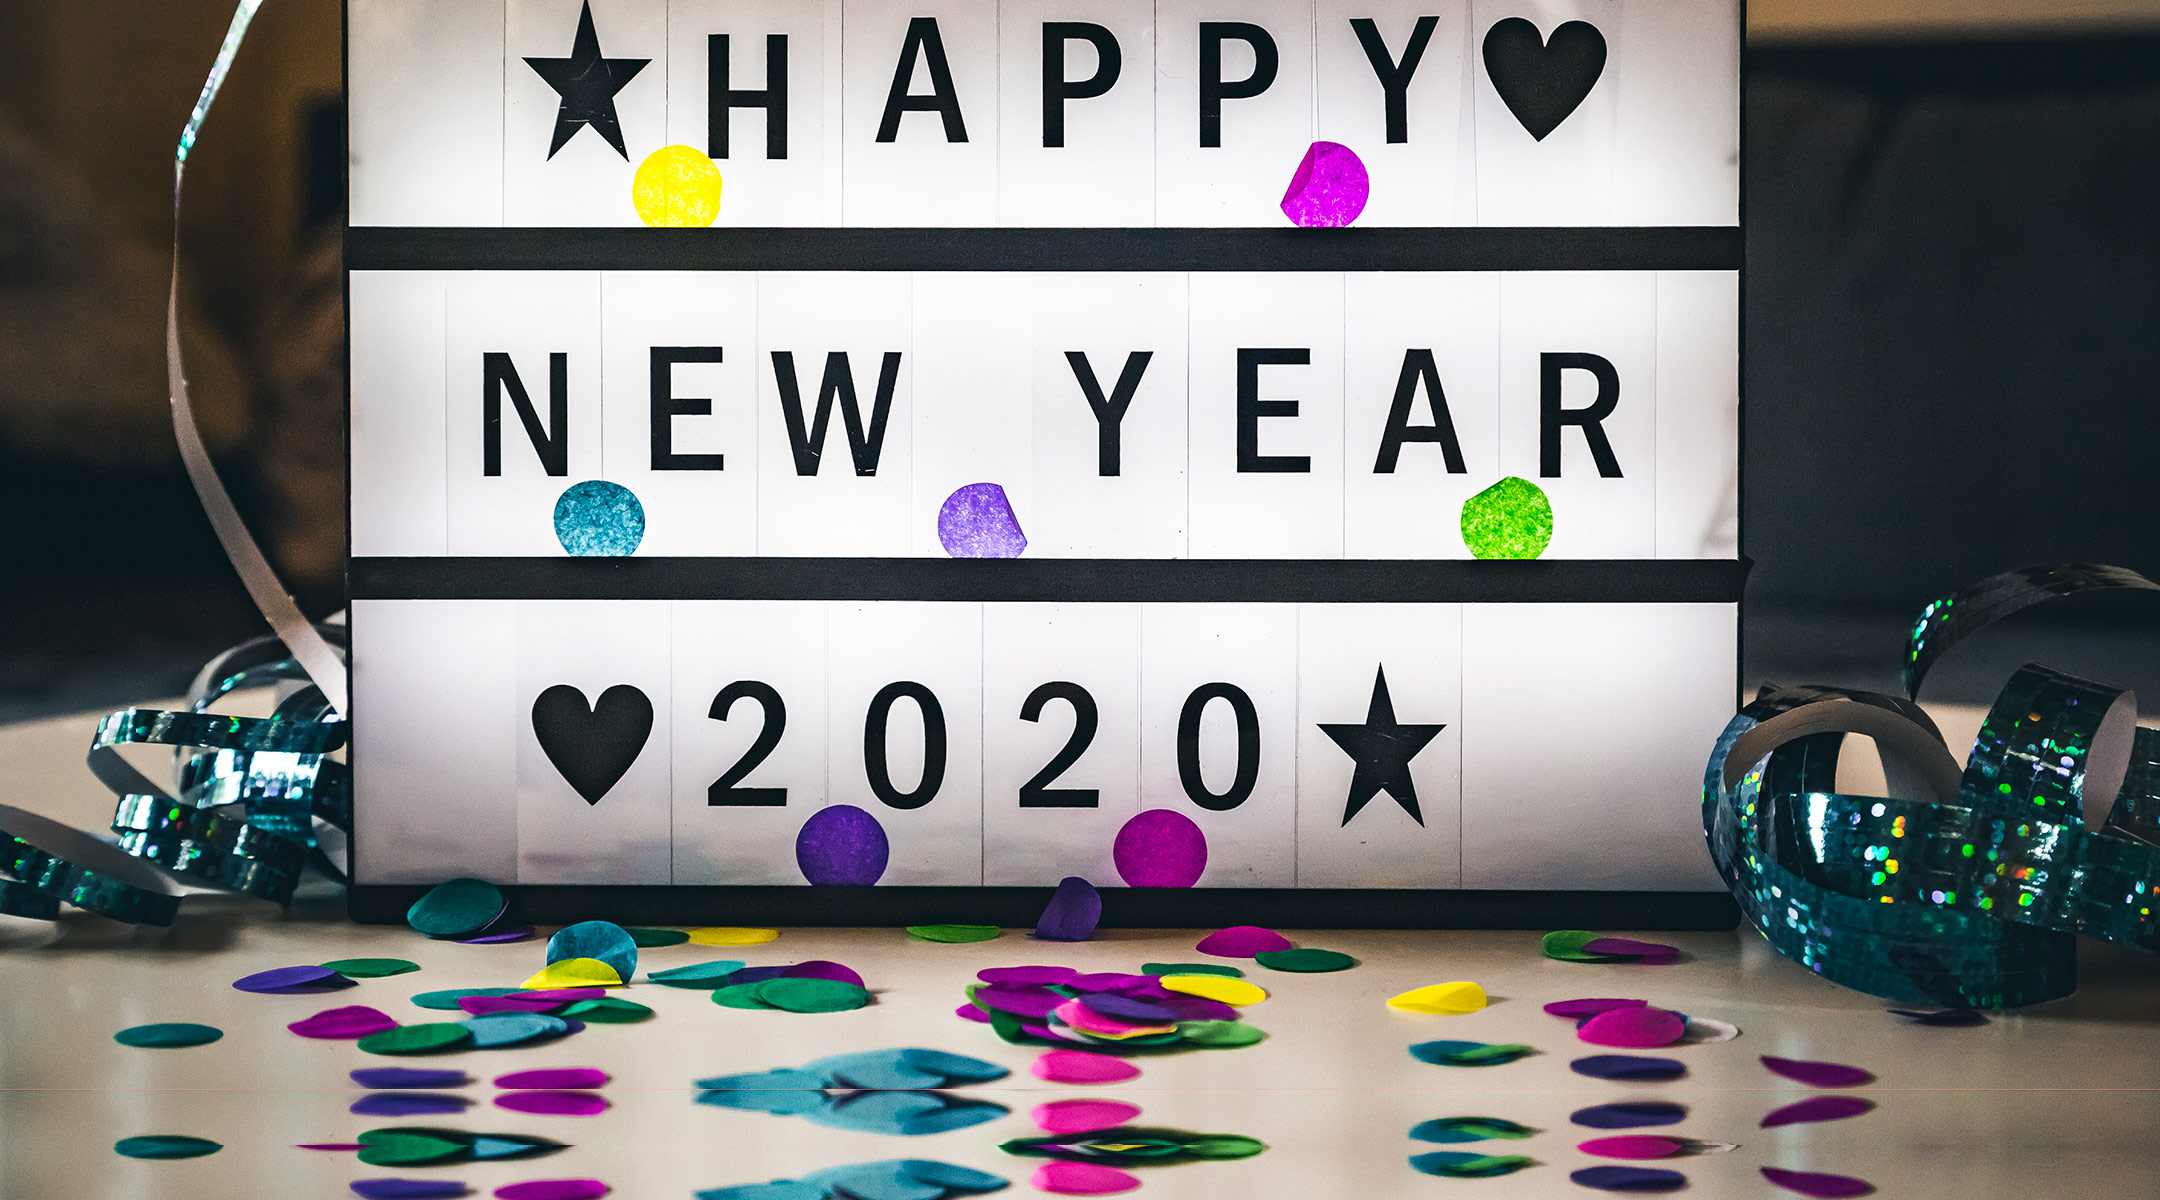 celebration sign that says happy new year 2020